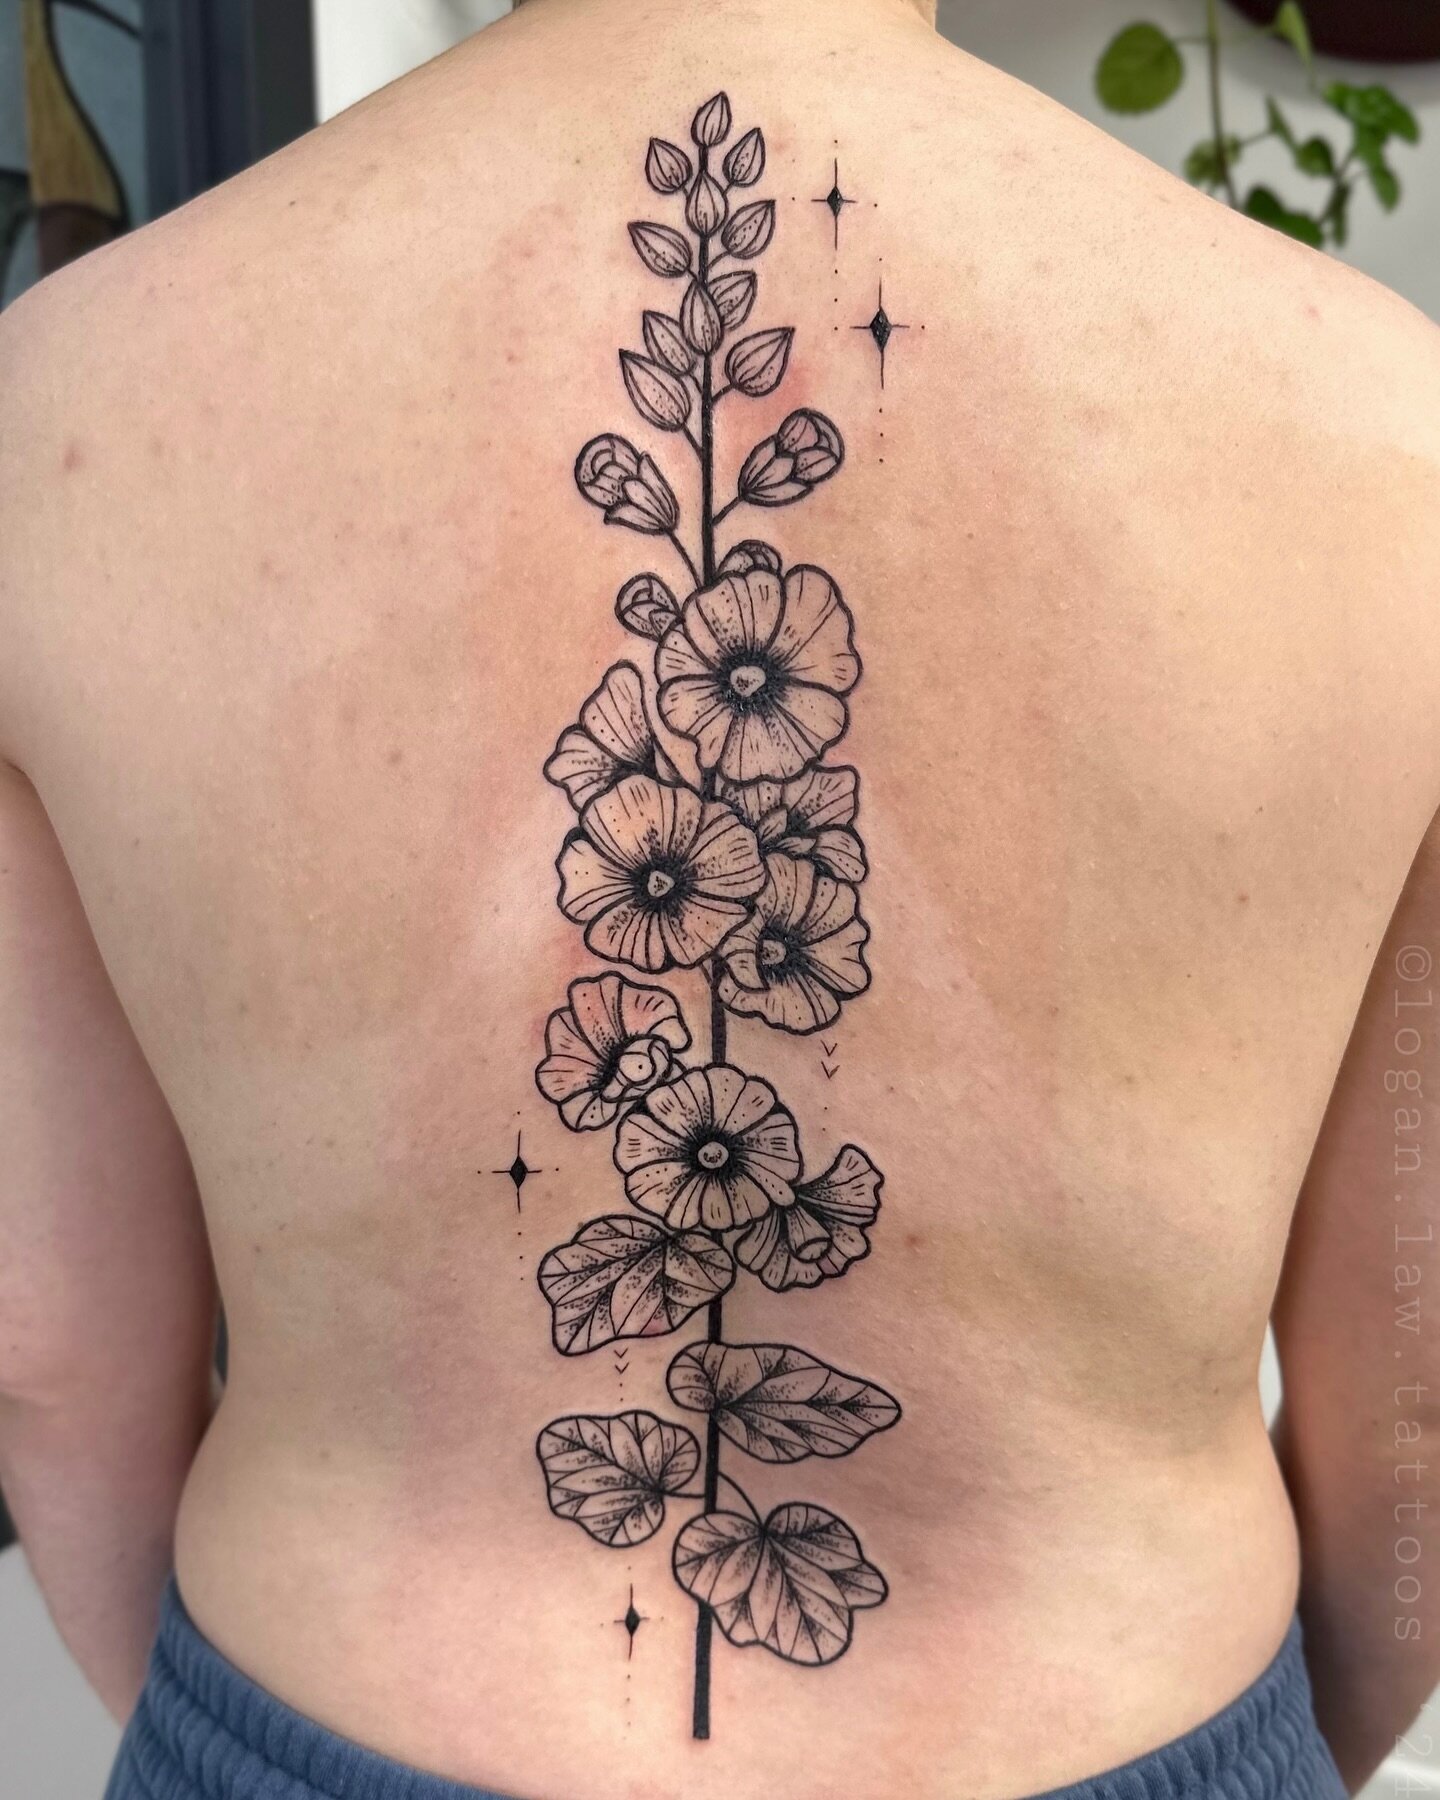 Hollyhock back piece done in about 4 hours ✣ thank you so much Elide! Done at @perennialtattoostudio ✦ made with @kurosumitattooink and @goodjudy.ca supplies
&bull;
&bull;
&bull;
#ecotattooing #blackwork #utahtattooartist